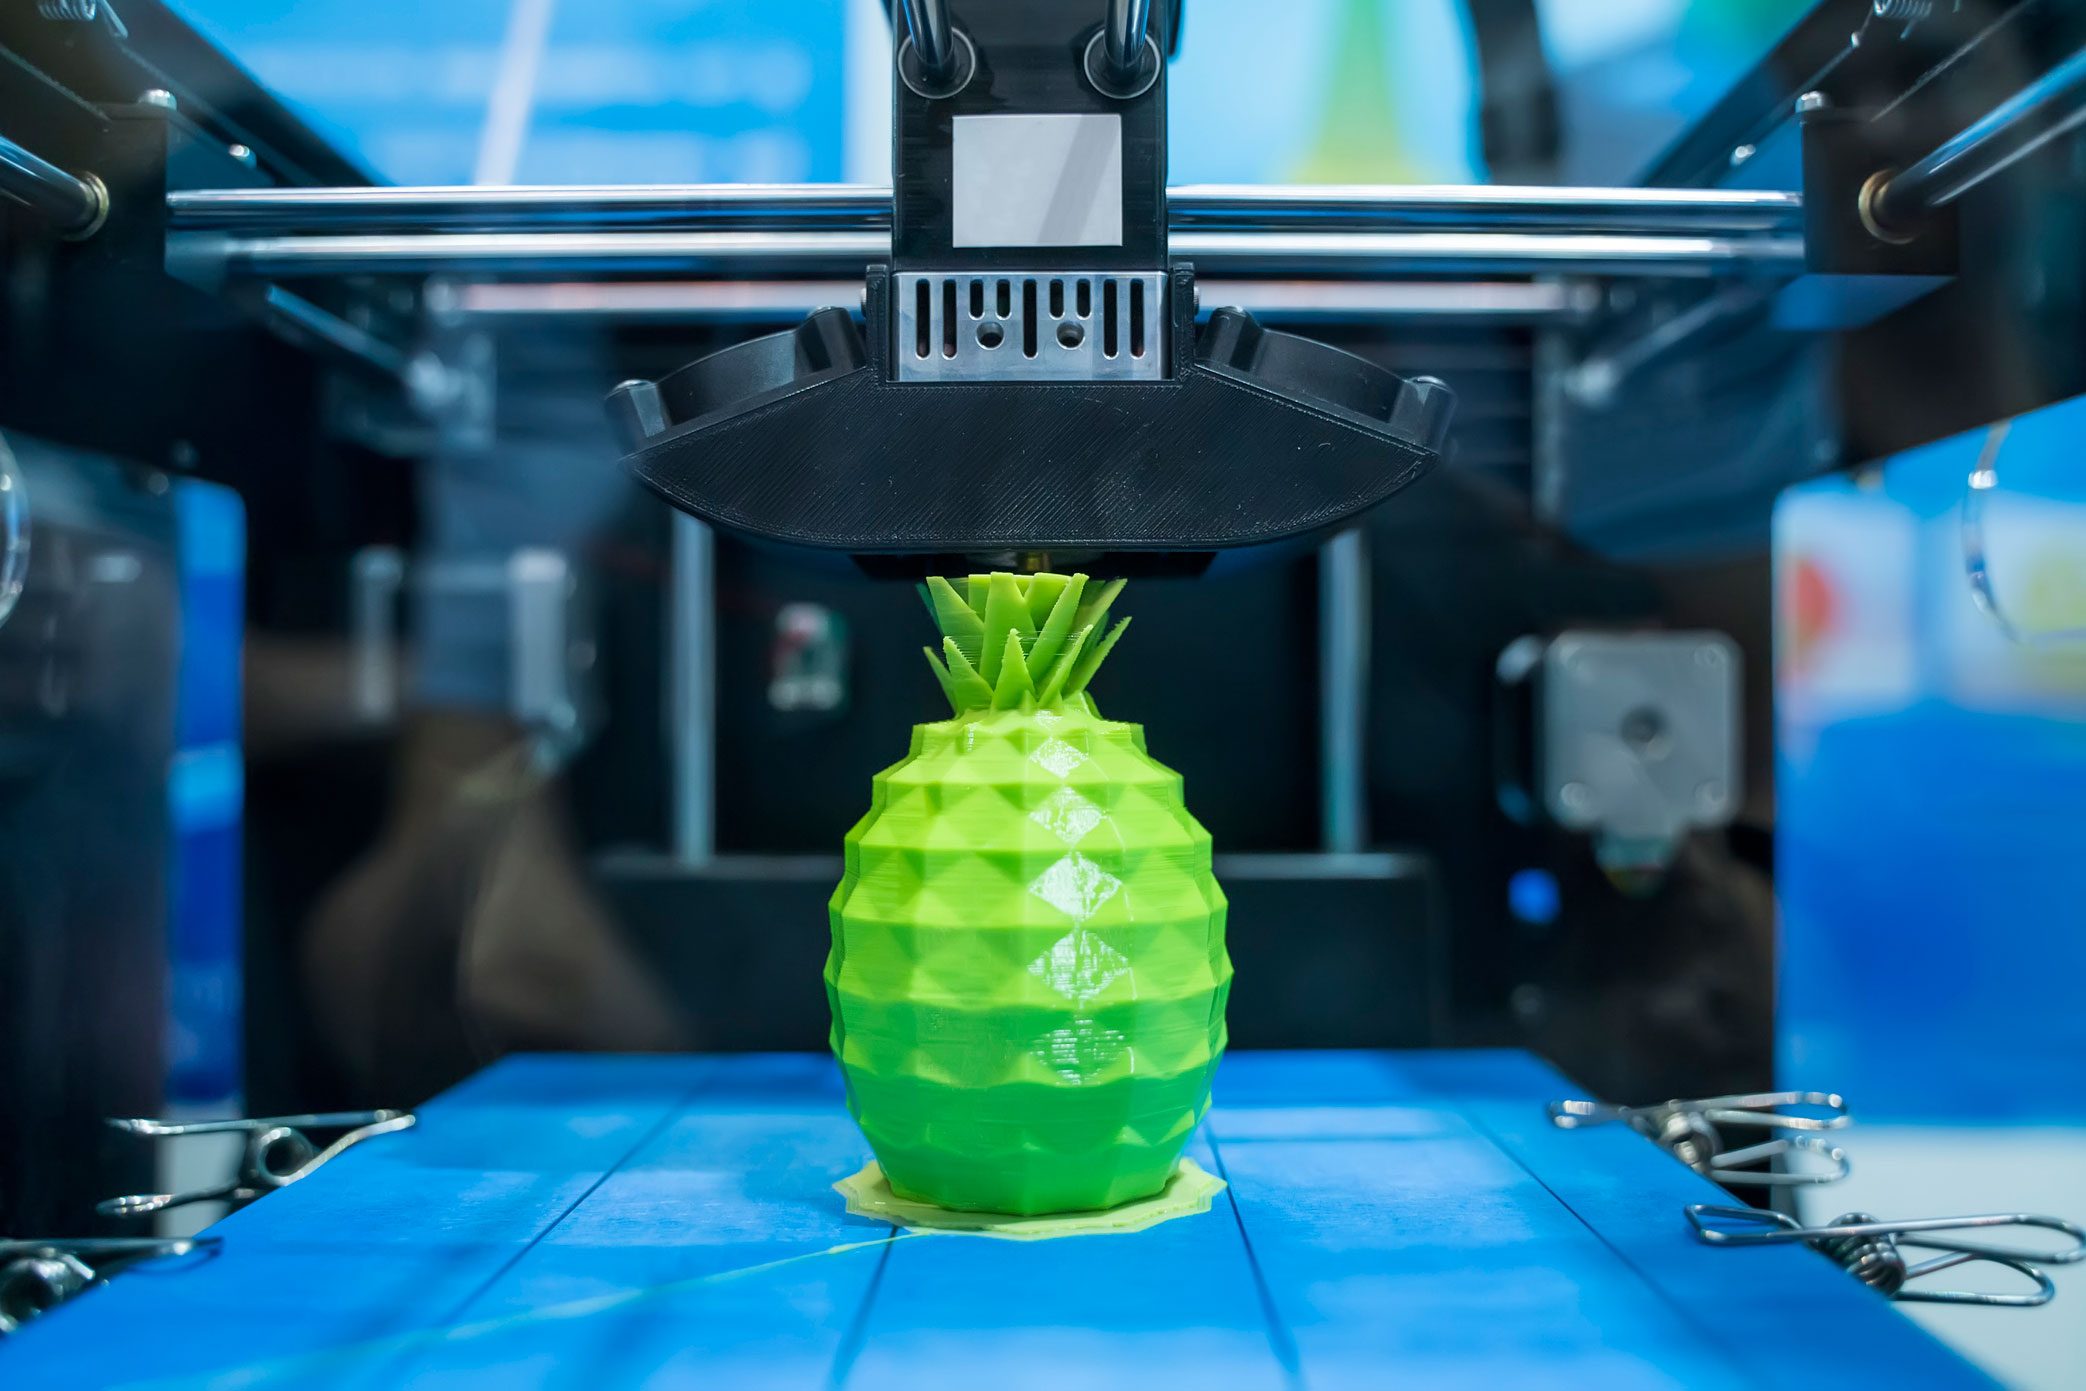 How Do 3D Work? Plus, How 3D Printing Is Being Used Now